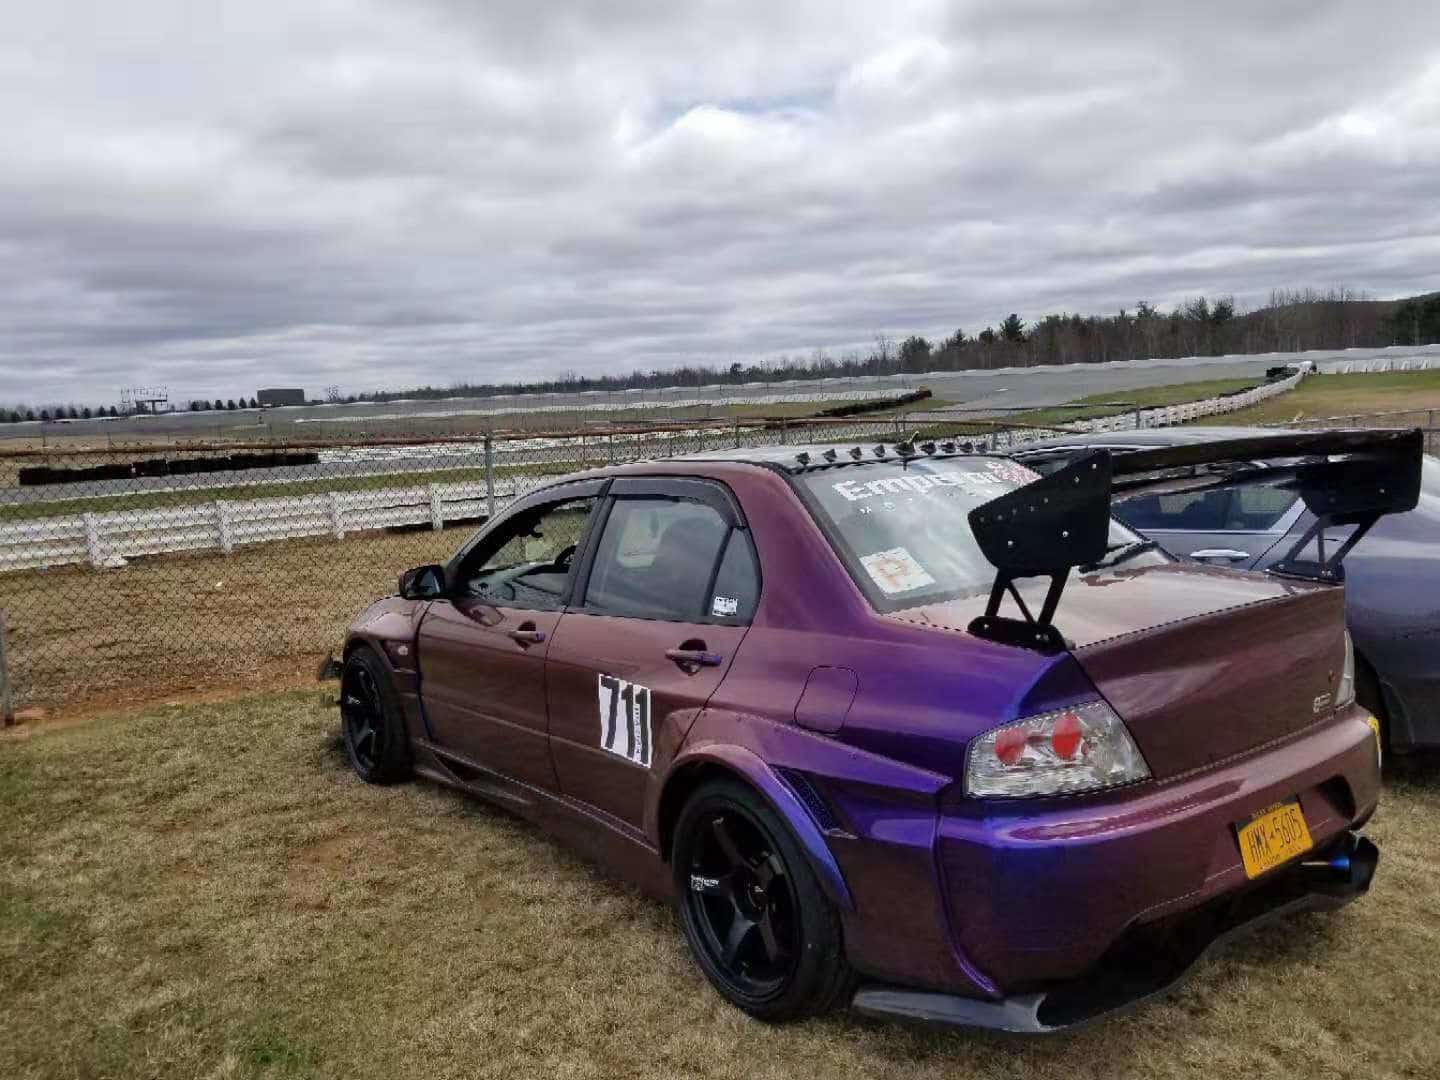 2003 Mitsubishi Lancer Evolution - Part out the car 2005 evo 8 only pick up only (11378) - Maspeth, NY 11378, United States